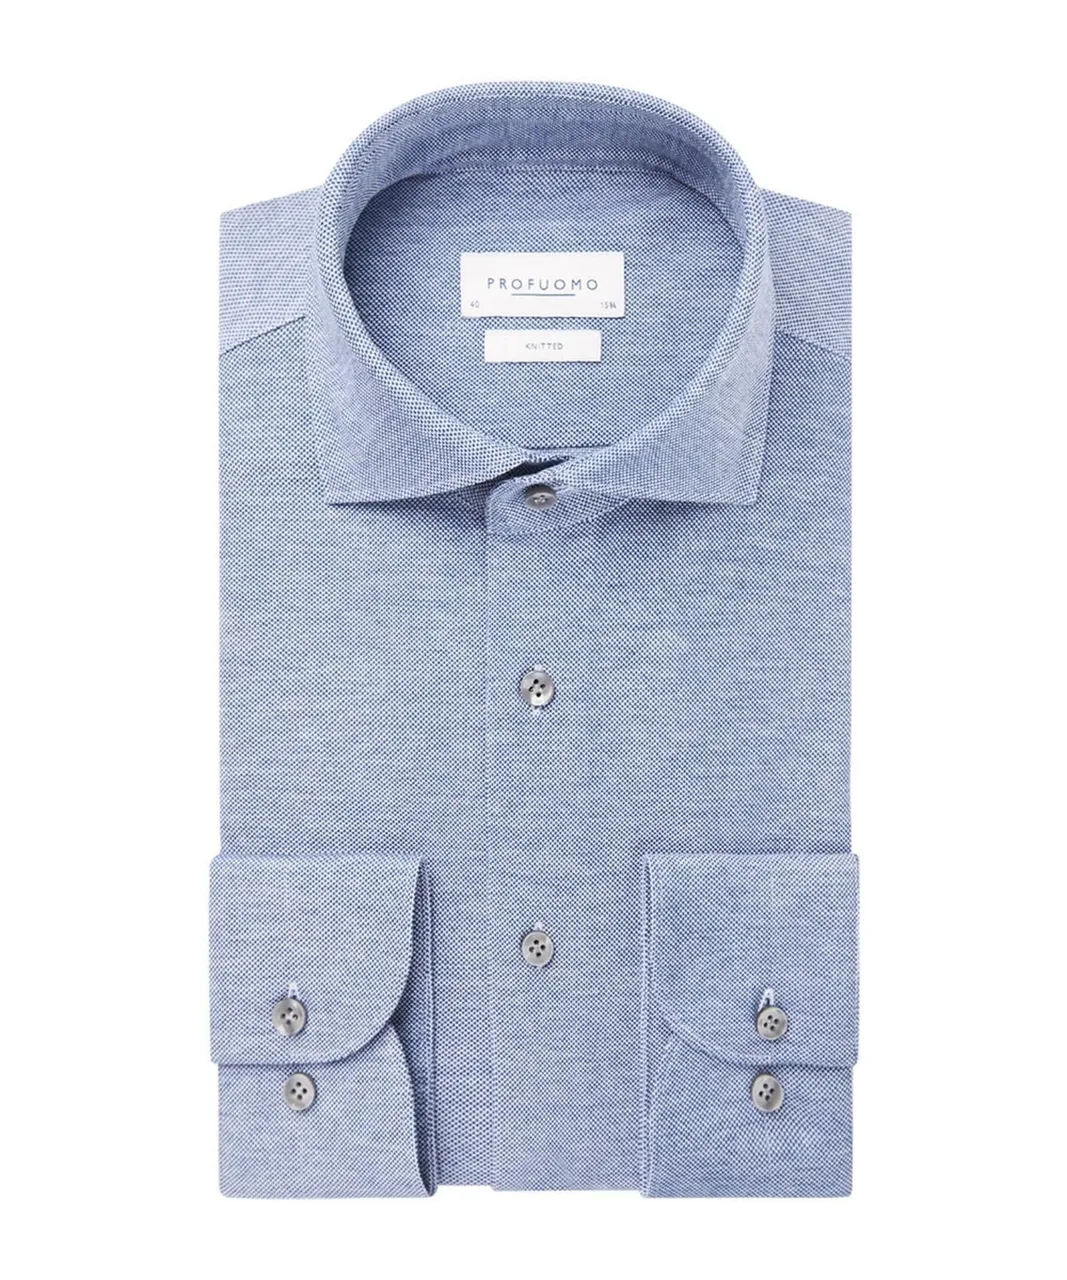 Profuomo Overhemd Knitted Shirt Blue   